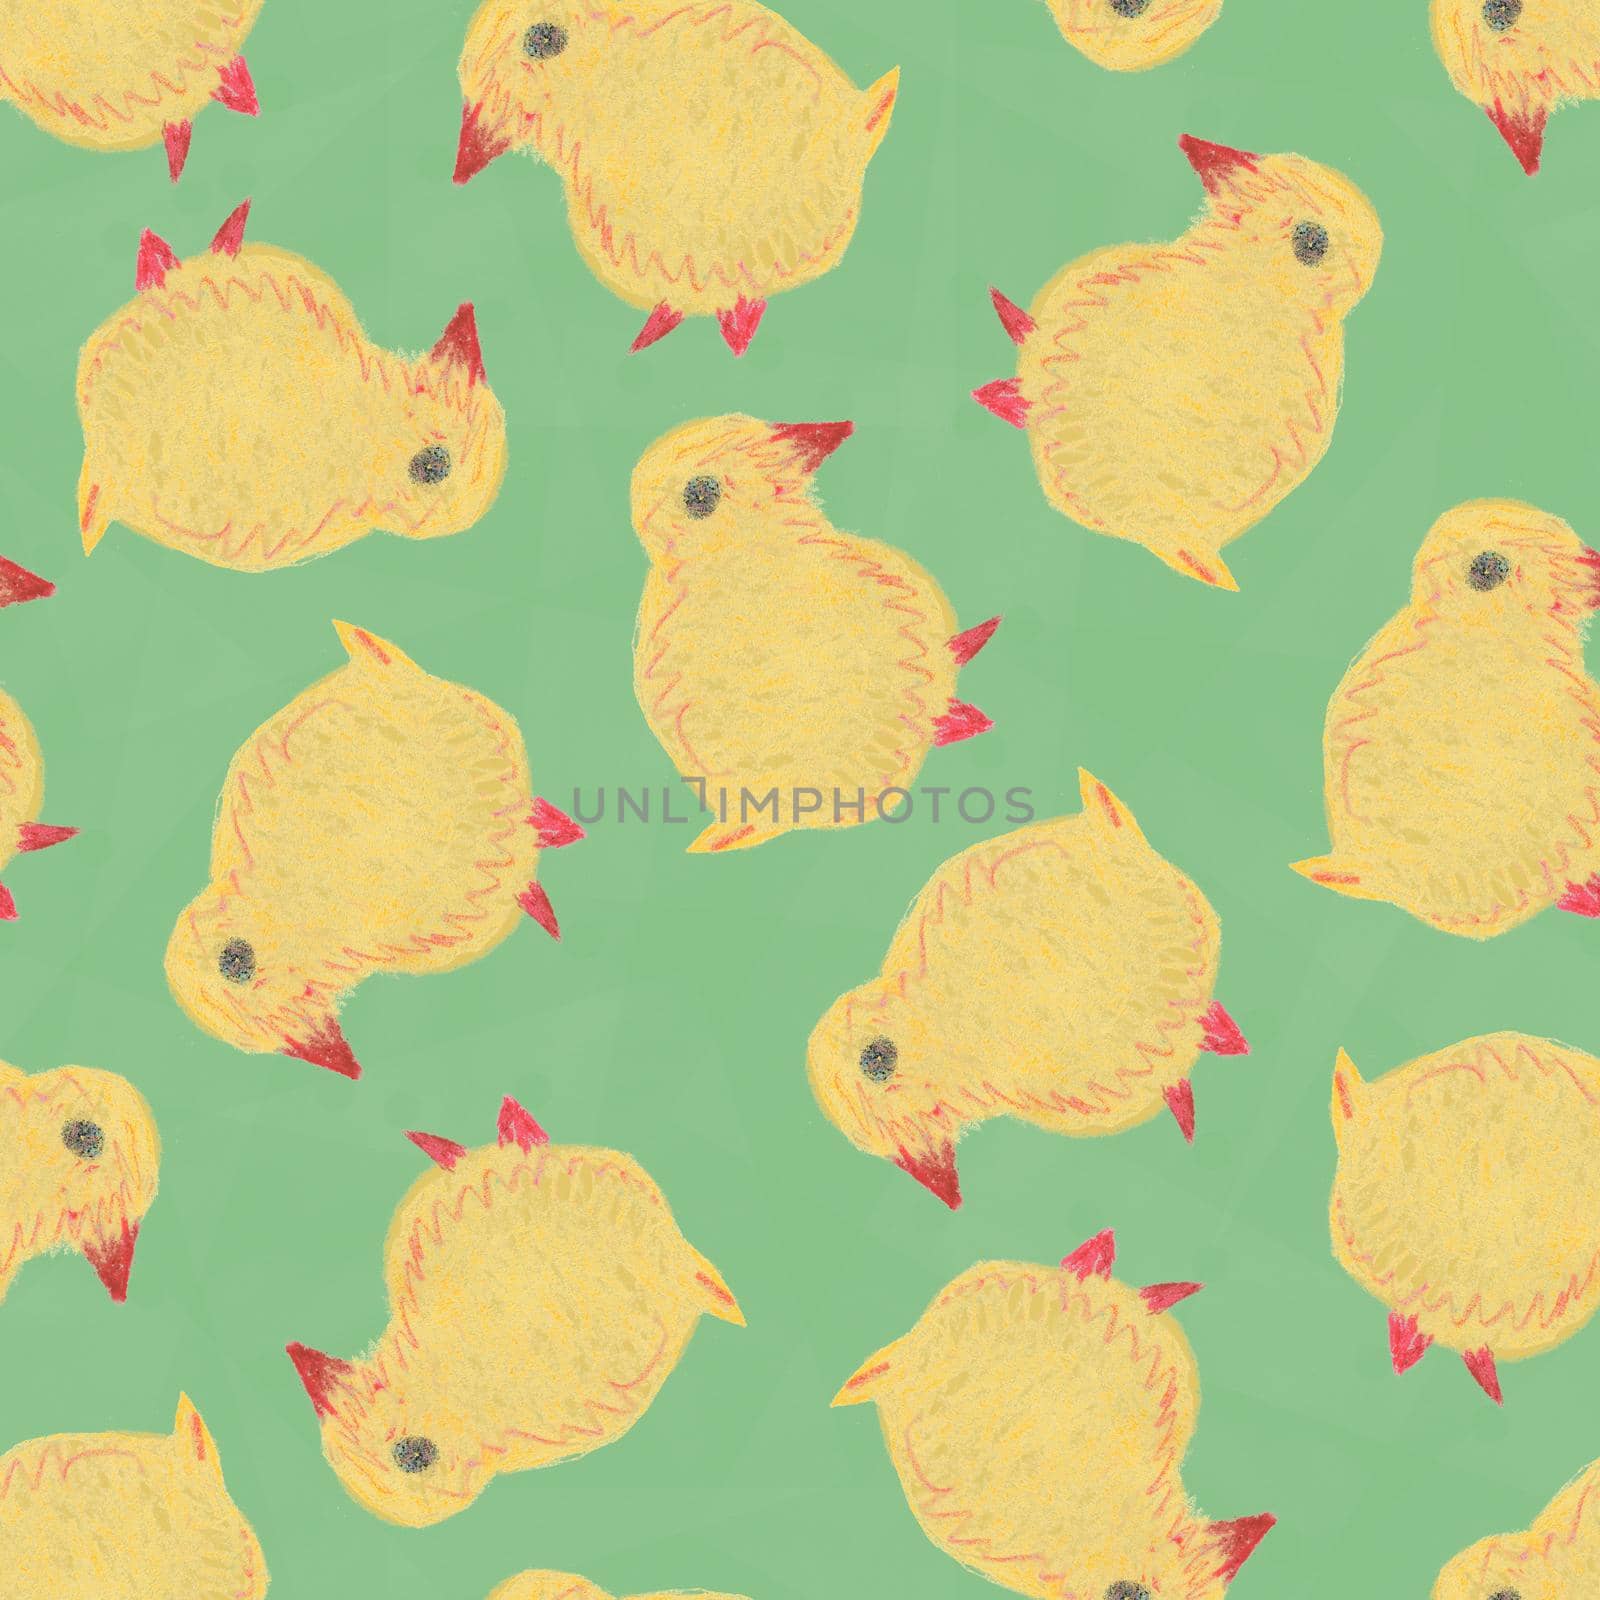 Cute Cartoon Hand Drawn Seamless Pattern With Little Yellow Chick. Funny Easter Watercolor Chicken on Green Background.